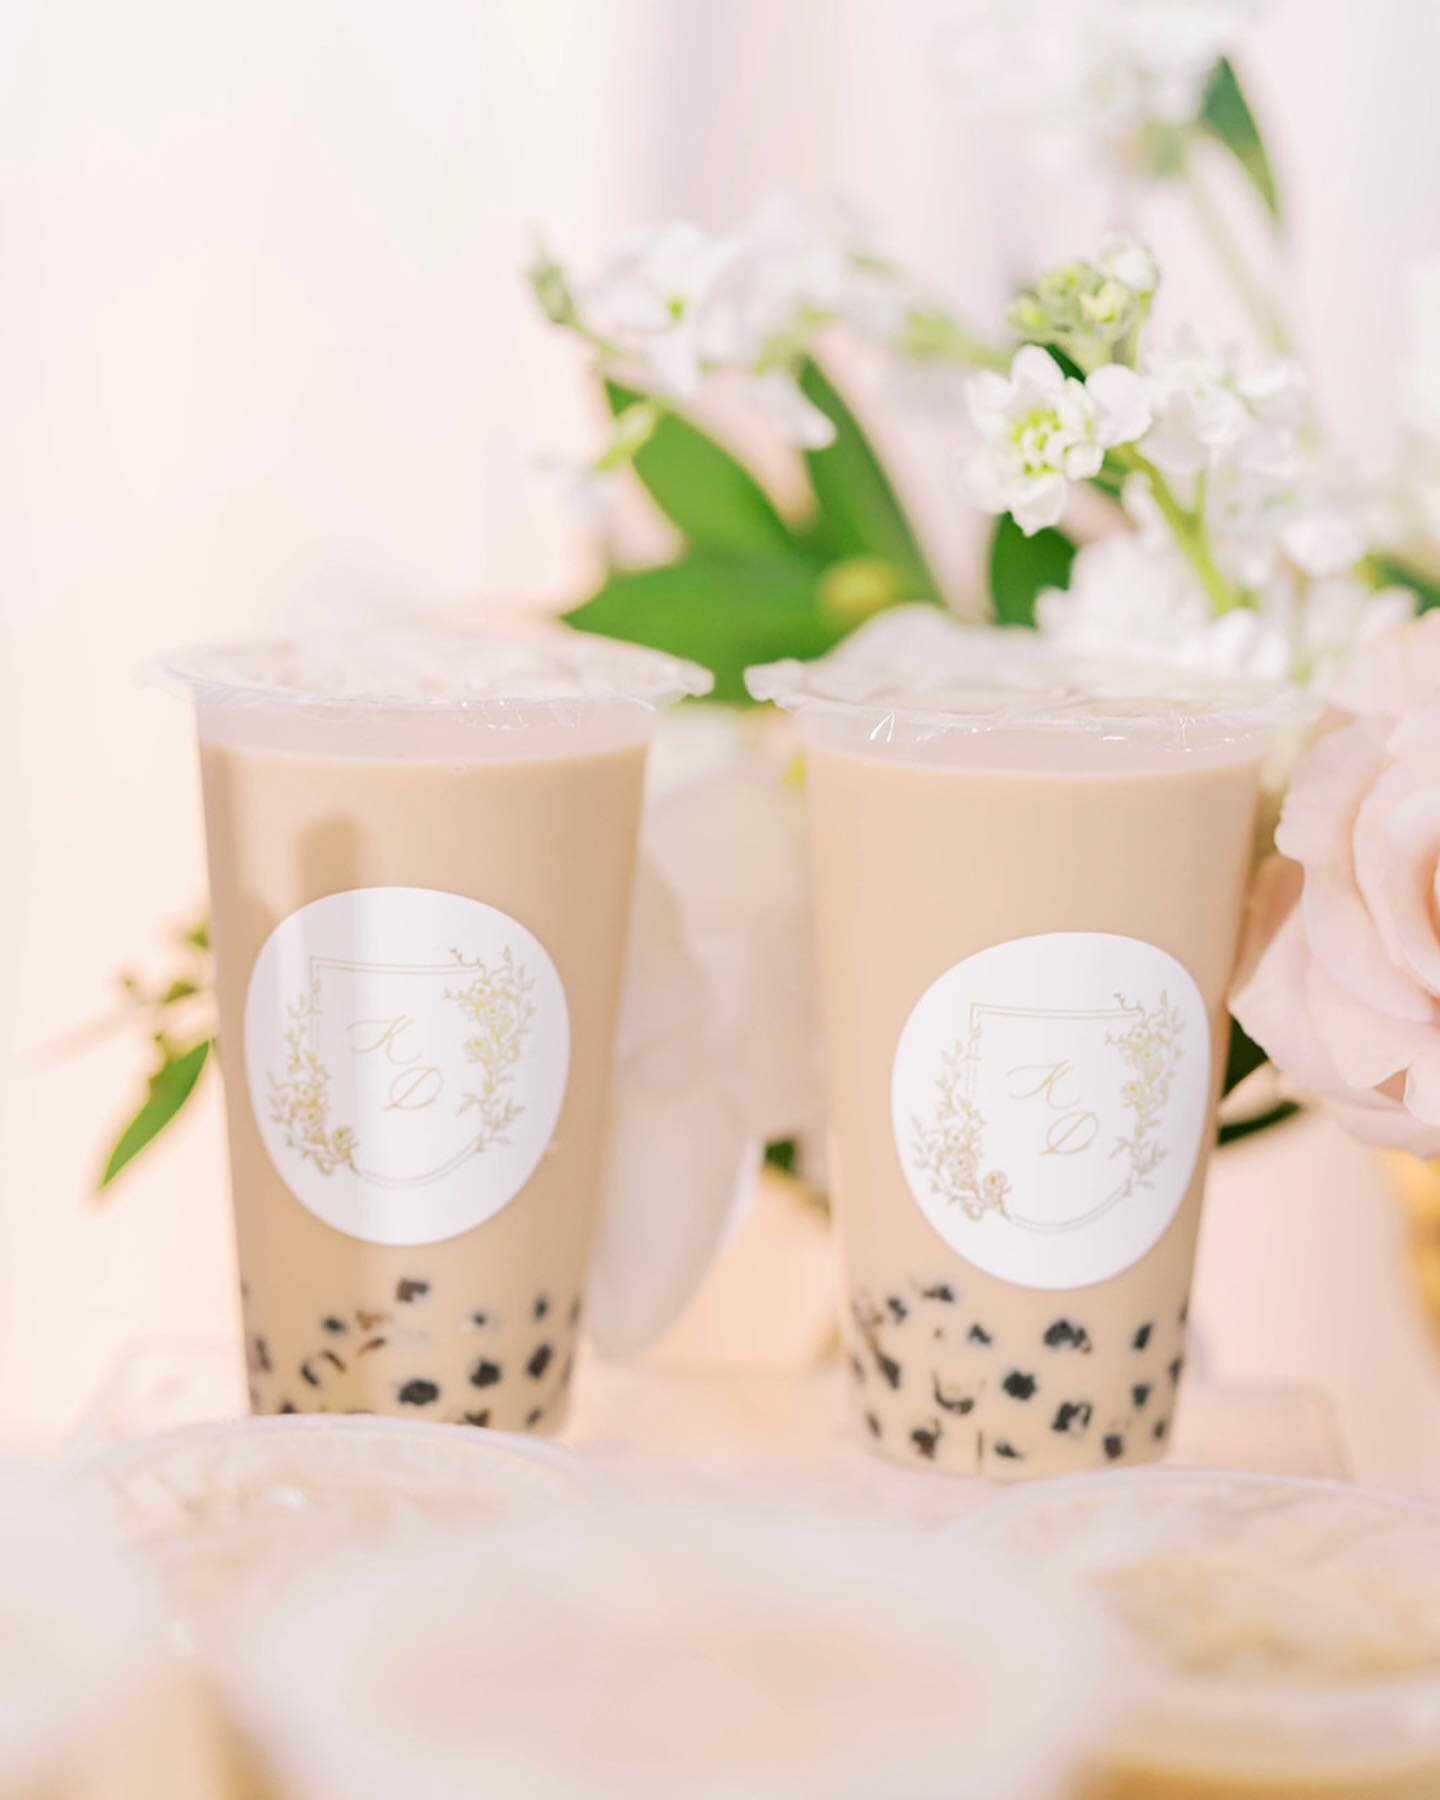 Who says boba can&rsquo;t be elegant? 😍 Loving our milk tea boba on display at Kim and Daniel&rsquo;s wedding! 

Photo @sarahharrisphoto 
Monogram @luckysisterpaperco 
Planner @gianevents 
Floral @callaroseandco 

#boba #bubbletea